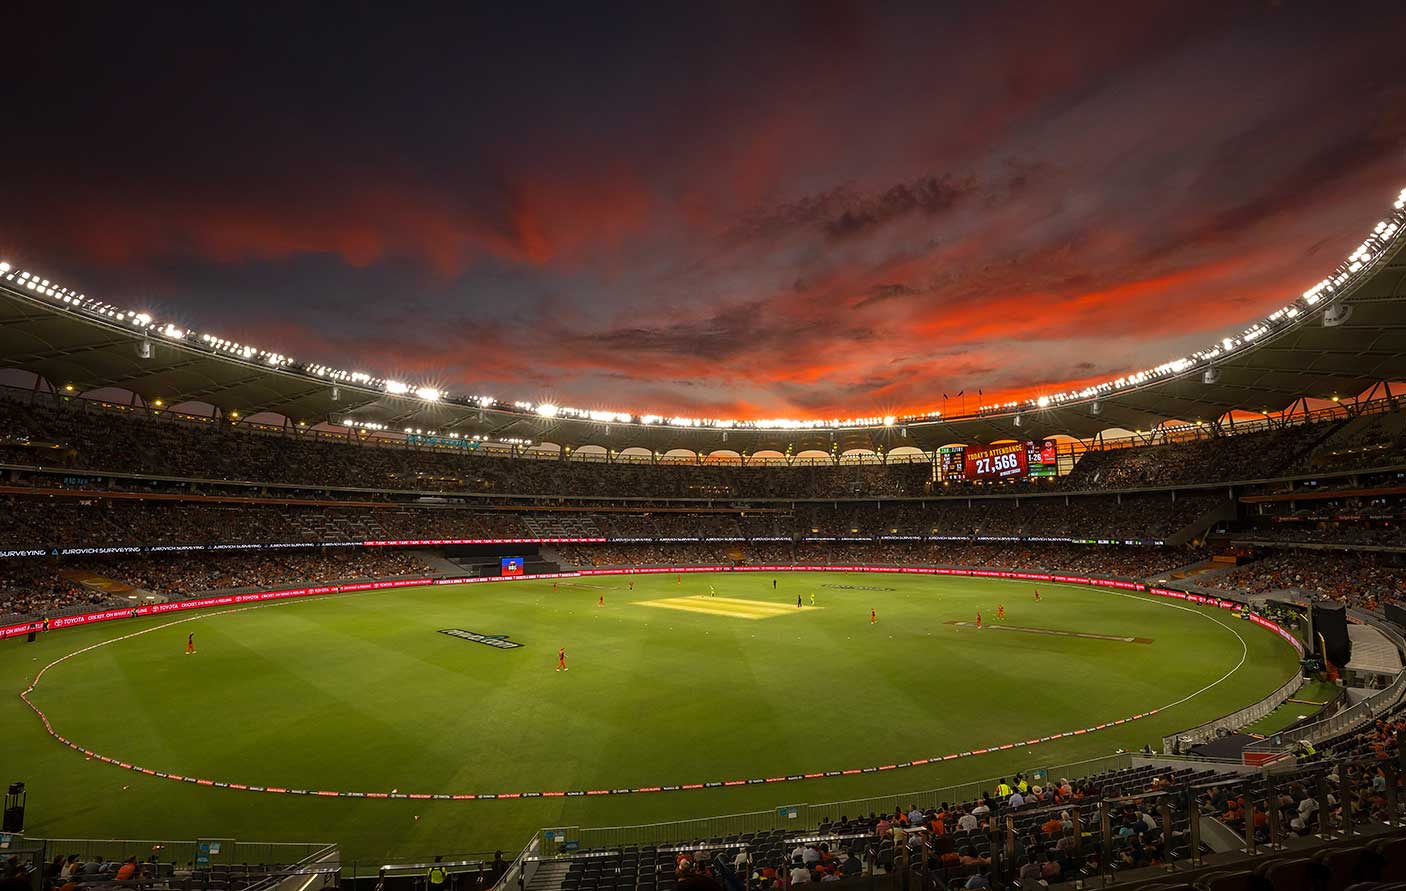 A cricket match in play at Optus Stadium at sunset